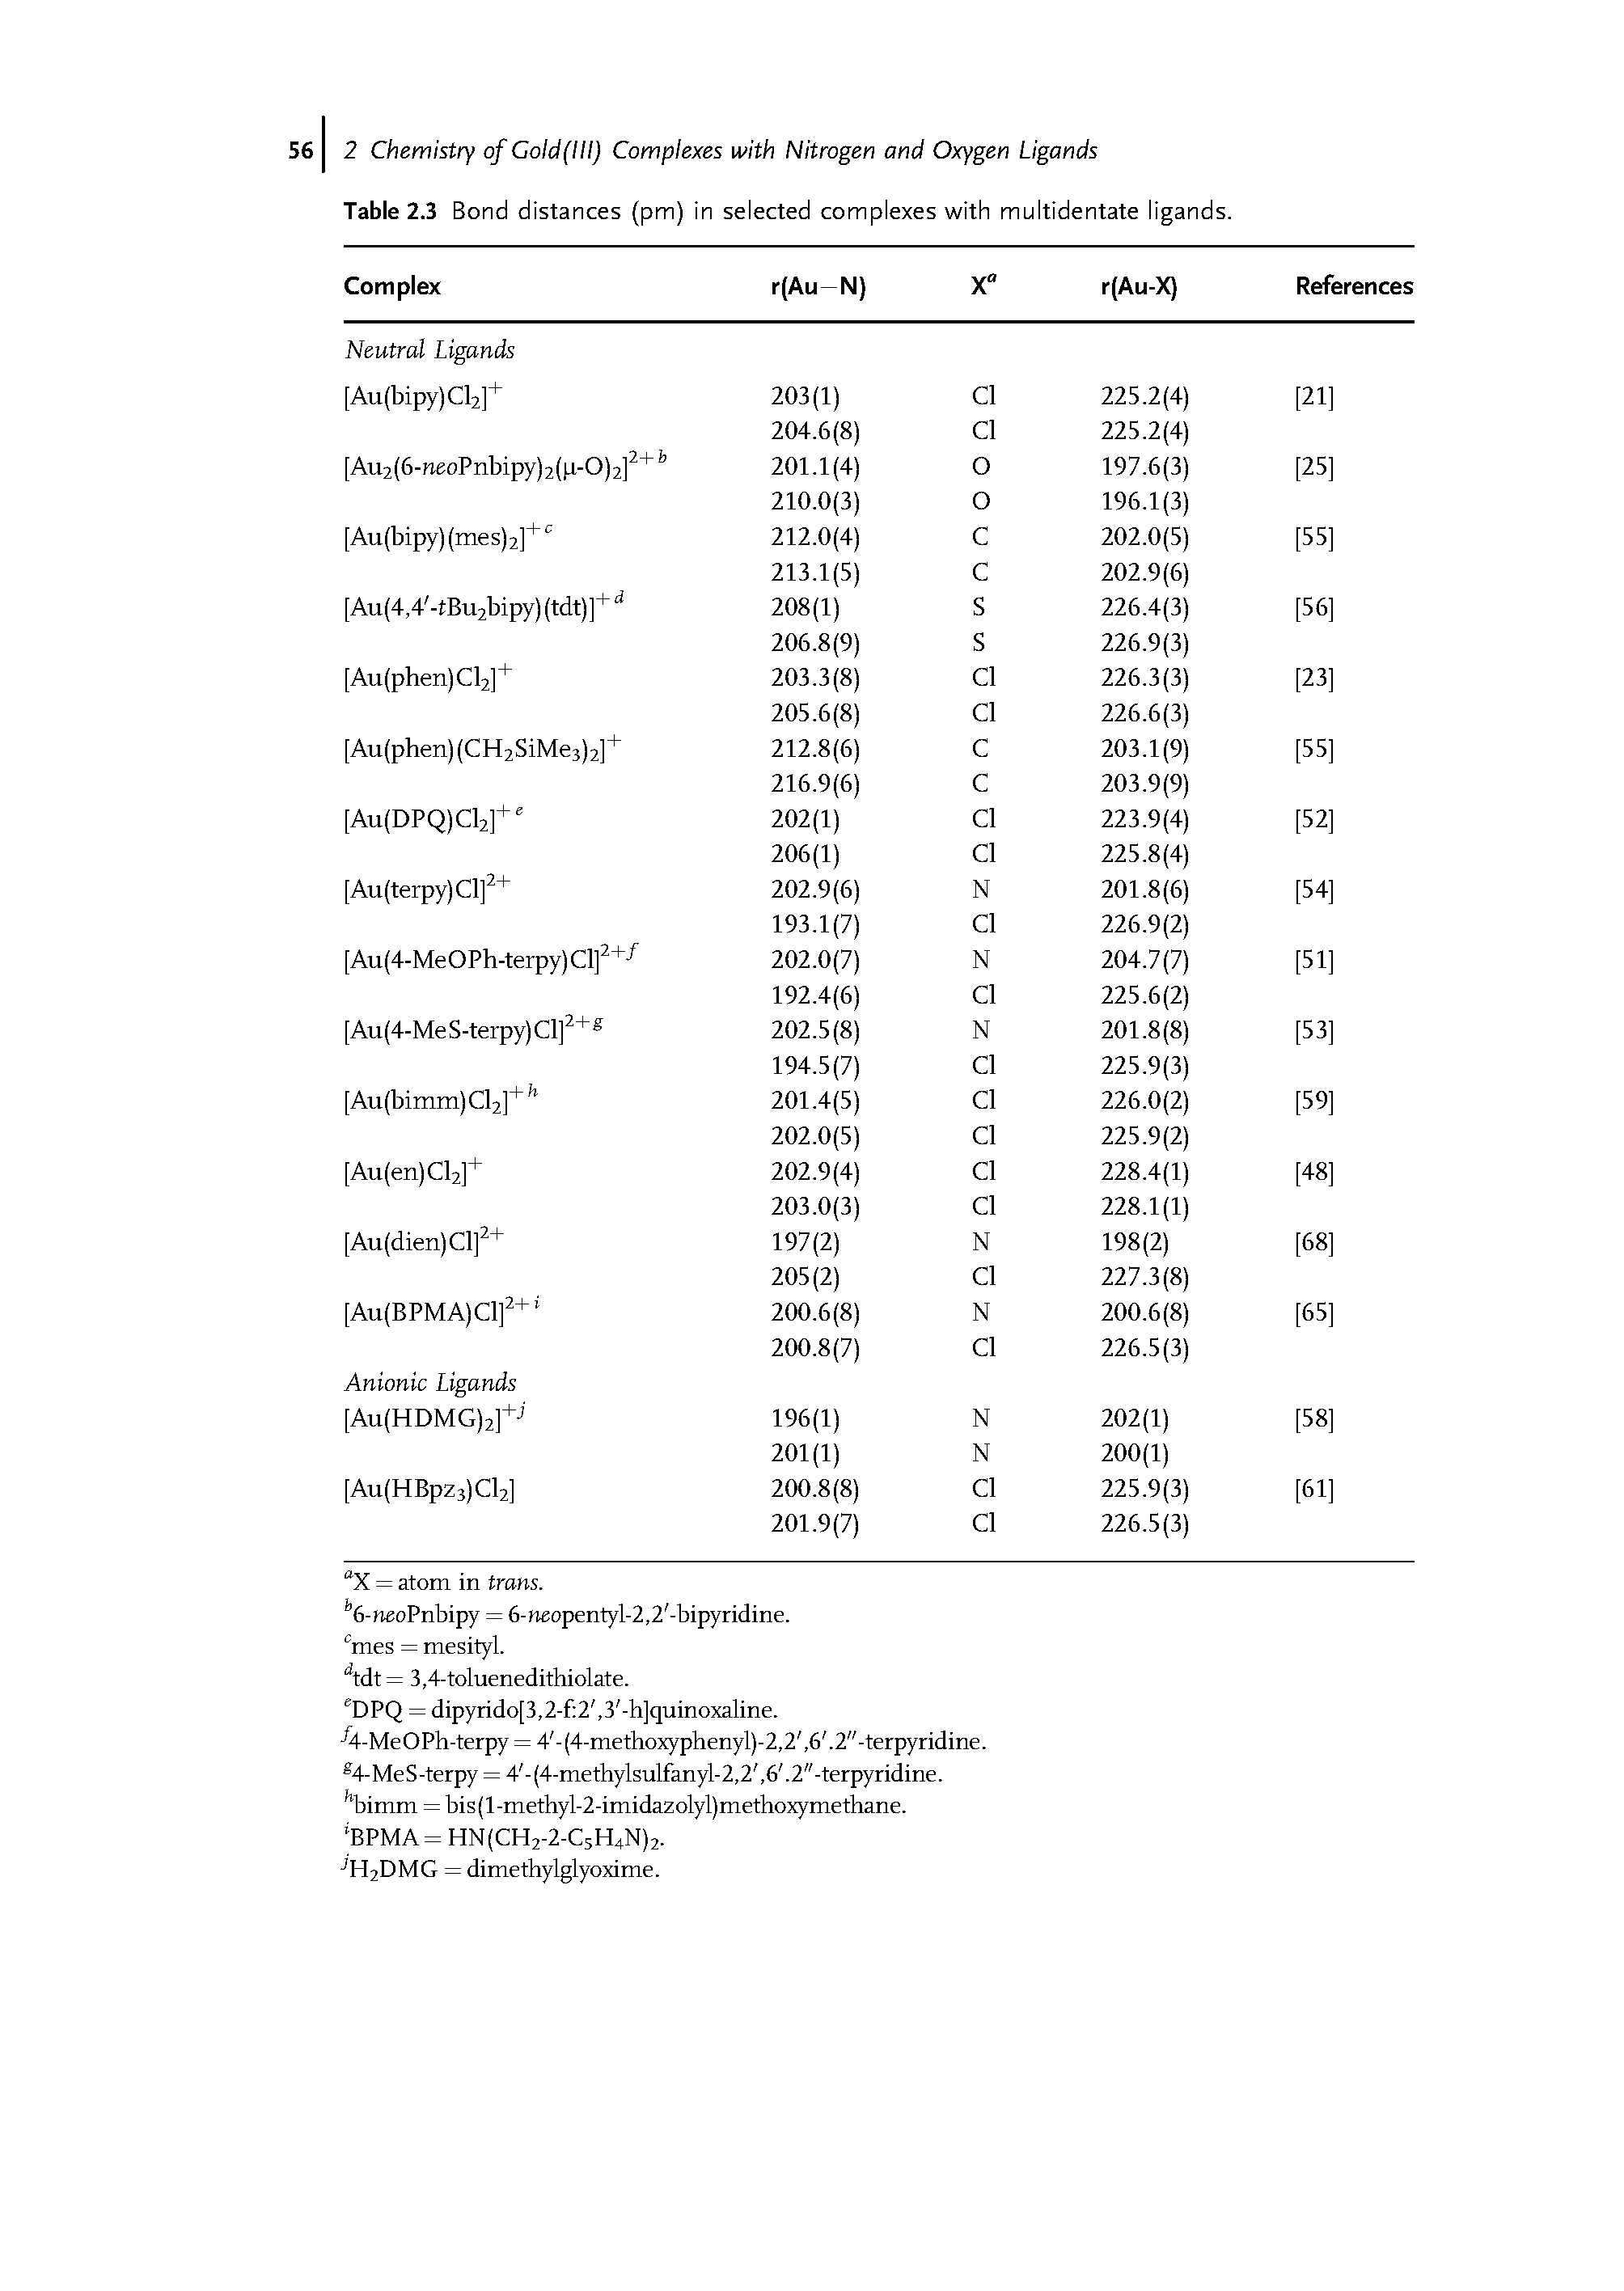 Table 2.3 Bond distances (pm) in selected complexes with multidentate ligands.